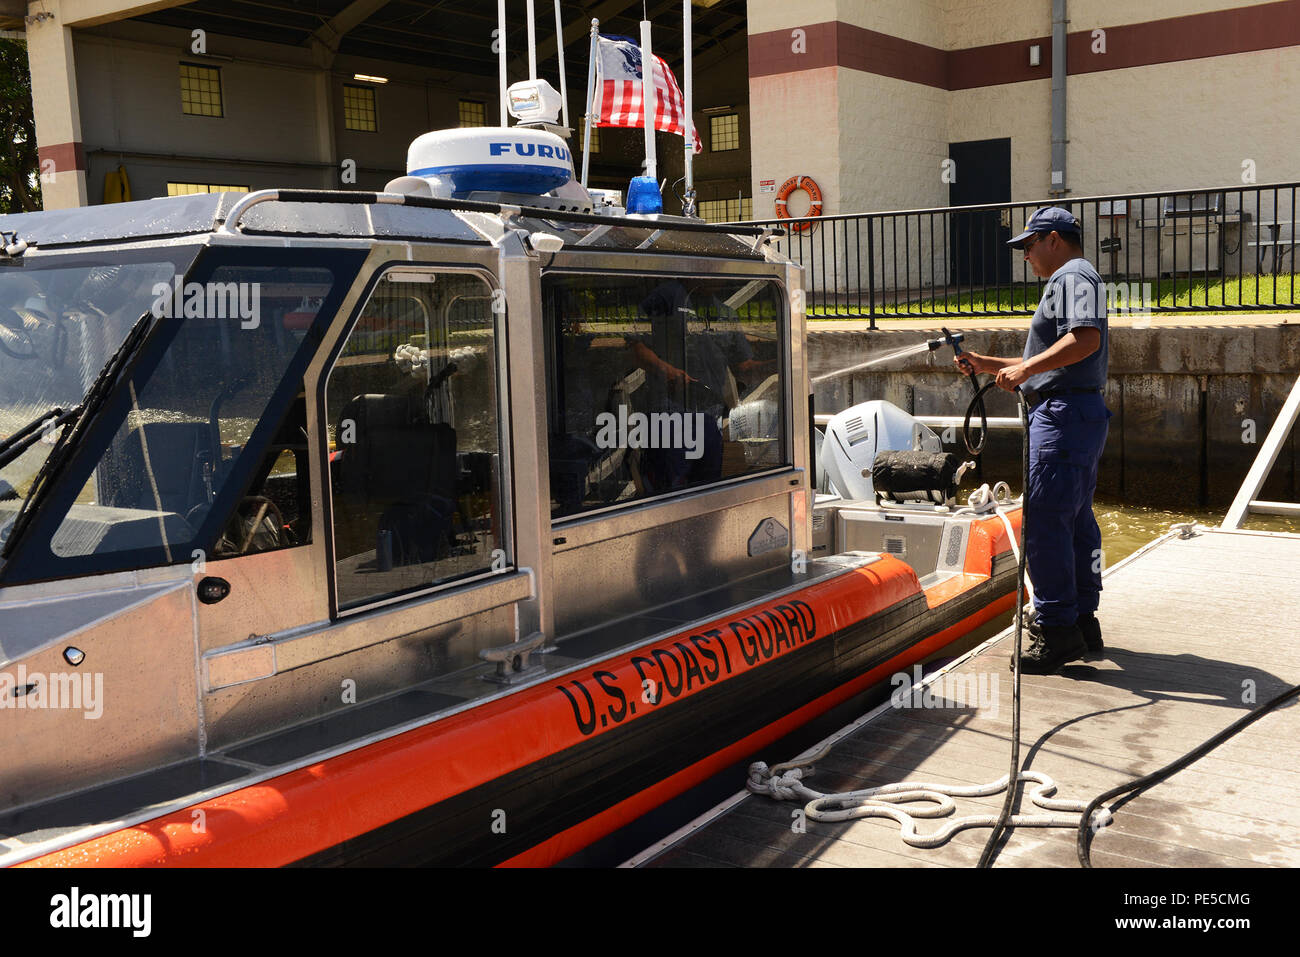 Petty Officer 1st Class Carlos Lopez, a machinery technician at Coast Guard Station Honolulu, sprays down a 29-foot Response Boat-Small (29249) at the station’s pier after a Honolulu Harbor patrol, Sept. 28, 2015. The RB-S II, designed with an increased emphasis on function and crew comfort, will replace the Defender-class RB-S as the older assets reach the end of their service life. (U.S. Coast Guard photo by Petty Officer 3rd Class Melissa E. McKenzie/Released) Stock Photo